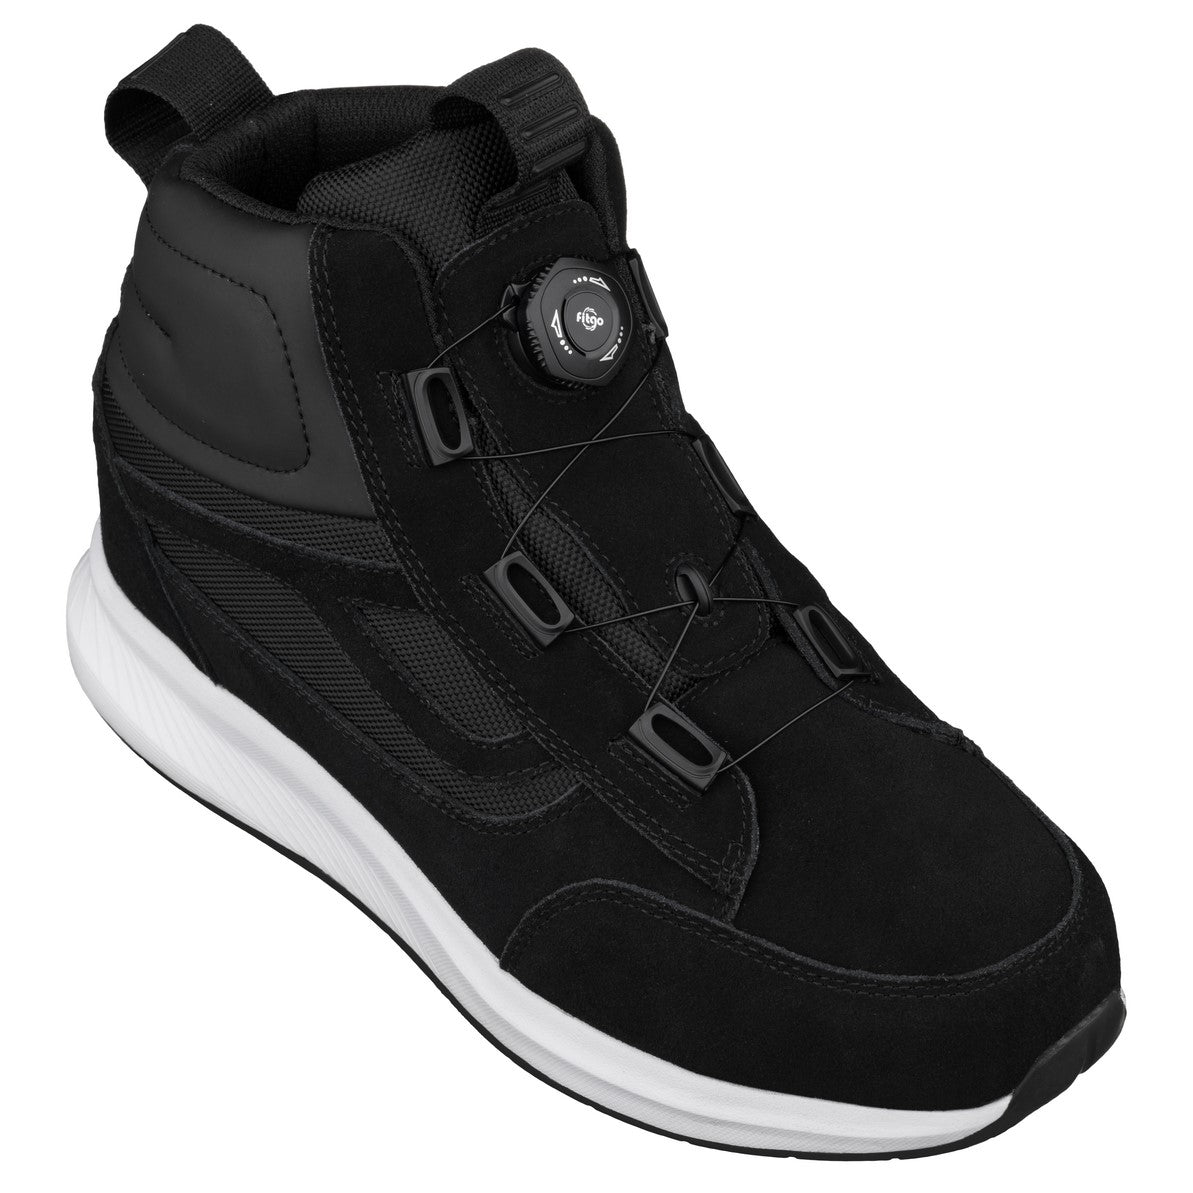 Elevator shoes height increase CALTO - S3220 - 3.2 Inches Taller (Black) - Lightweight Sneakers